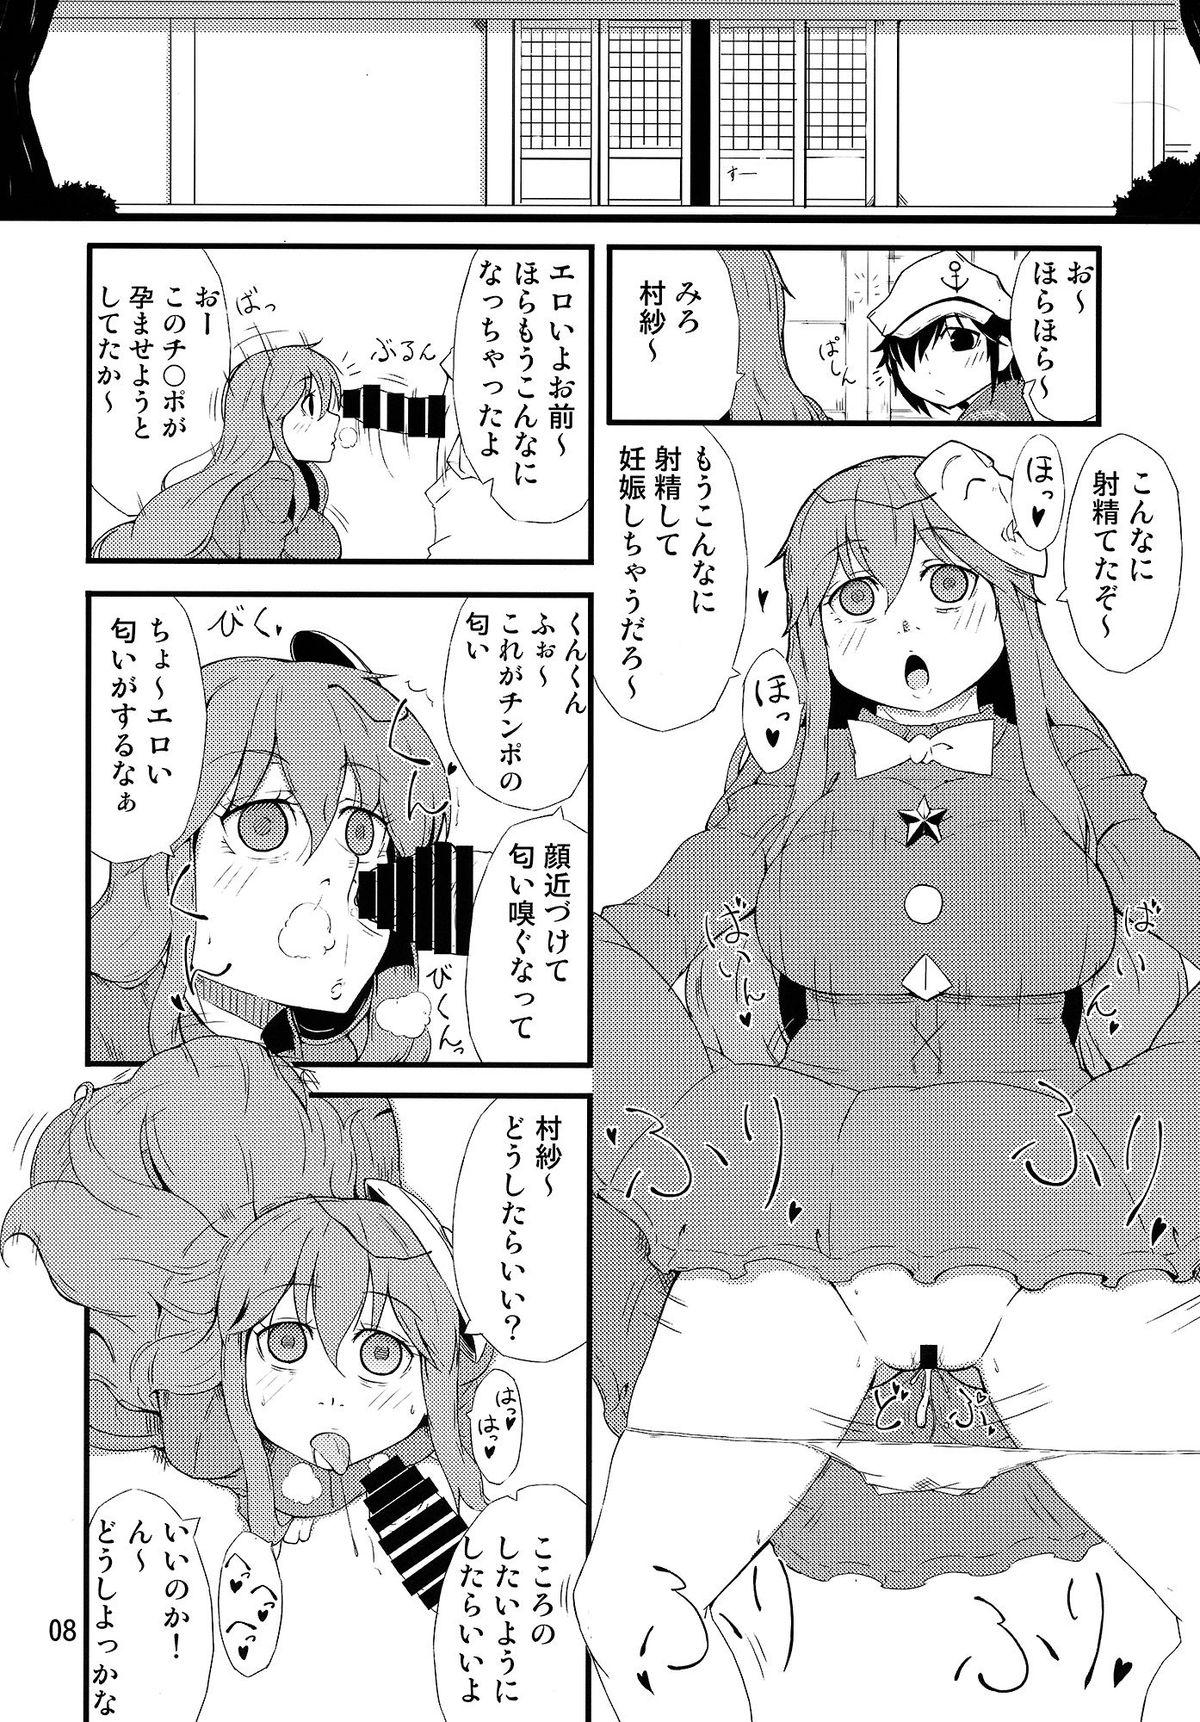 Best Blowjob Ever FAKE FACE - Touhou project Whores - Page 7